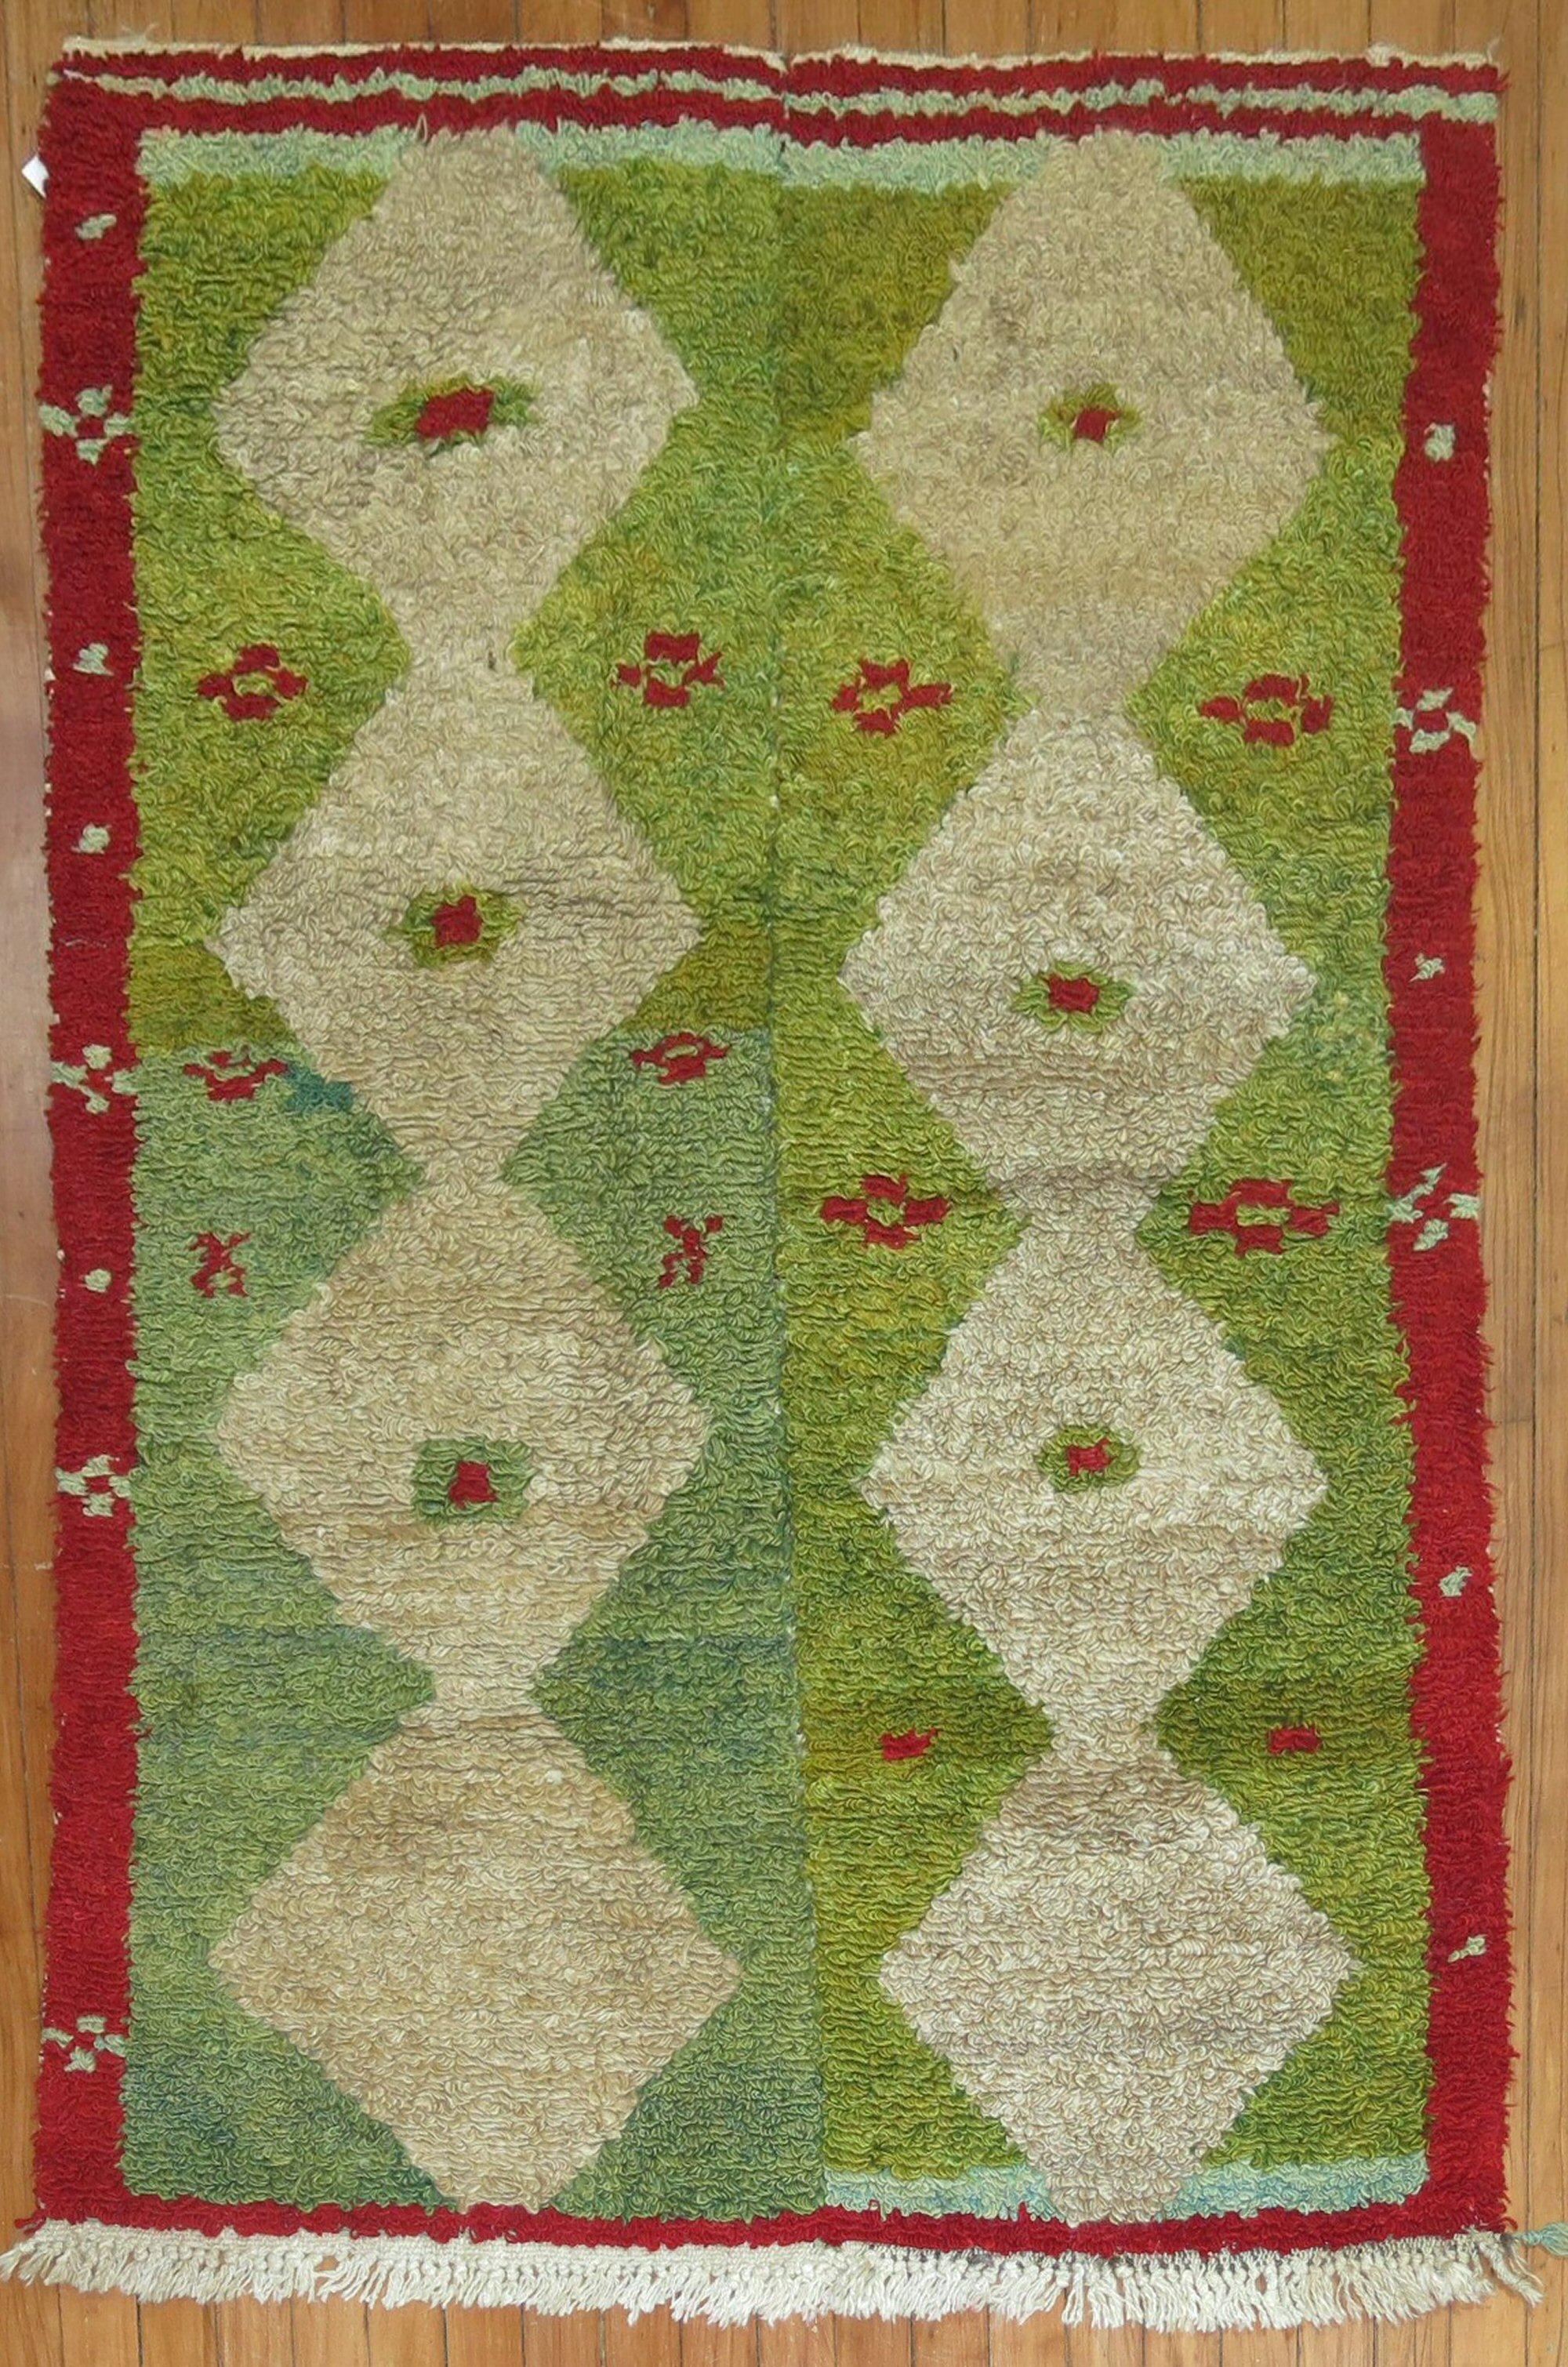 One-of-a-kind Turkish Konya rug in green and red

Measures: 3'4” x 4'9''.